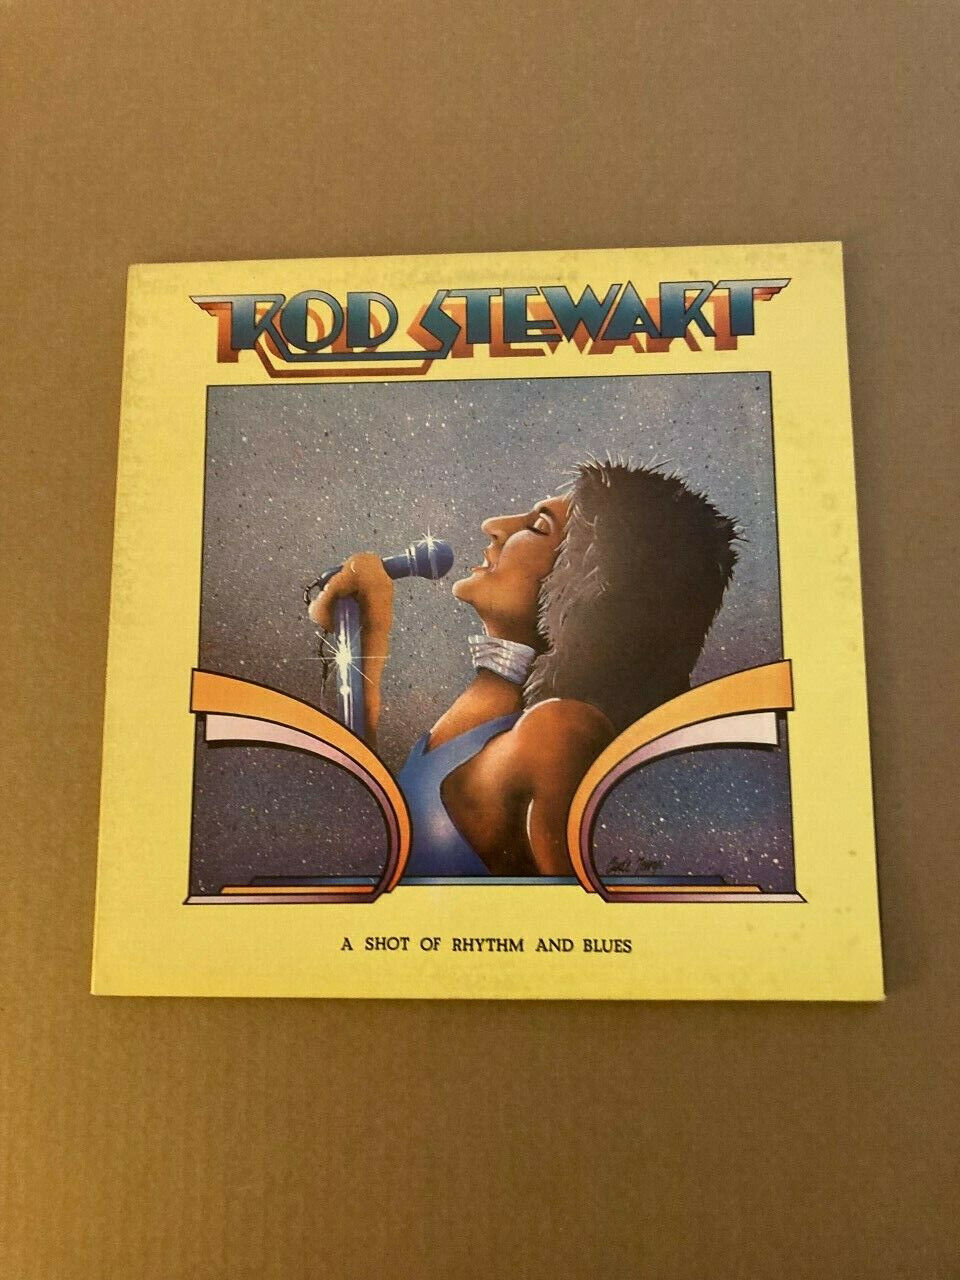 Rod Stewart  A Shot of Rhythm And Blues 1976 LP Record Album Viny PRIVATE STOCK 